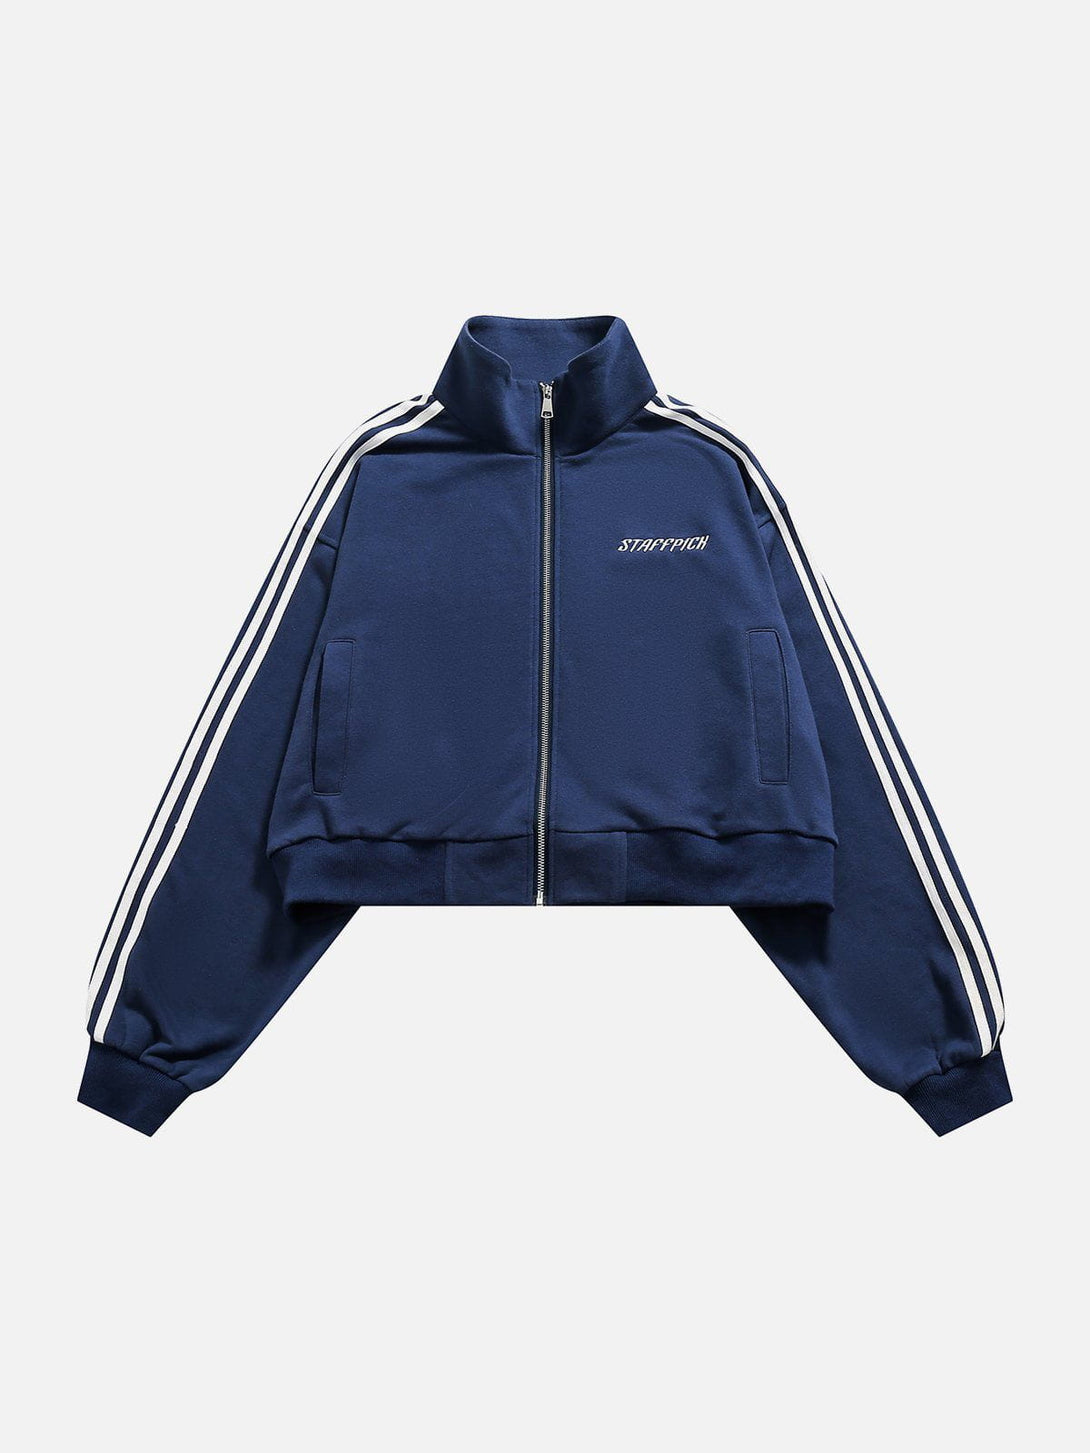 Levefly - Solid Color Jackets - Streetwear Fashion - levefly.com